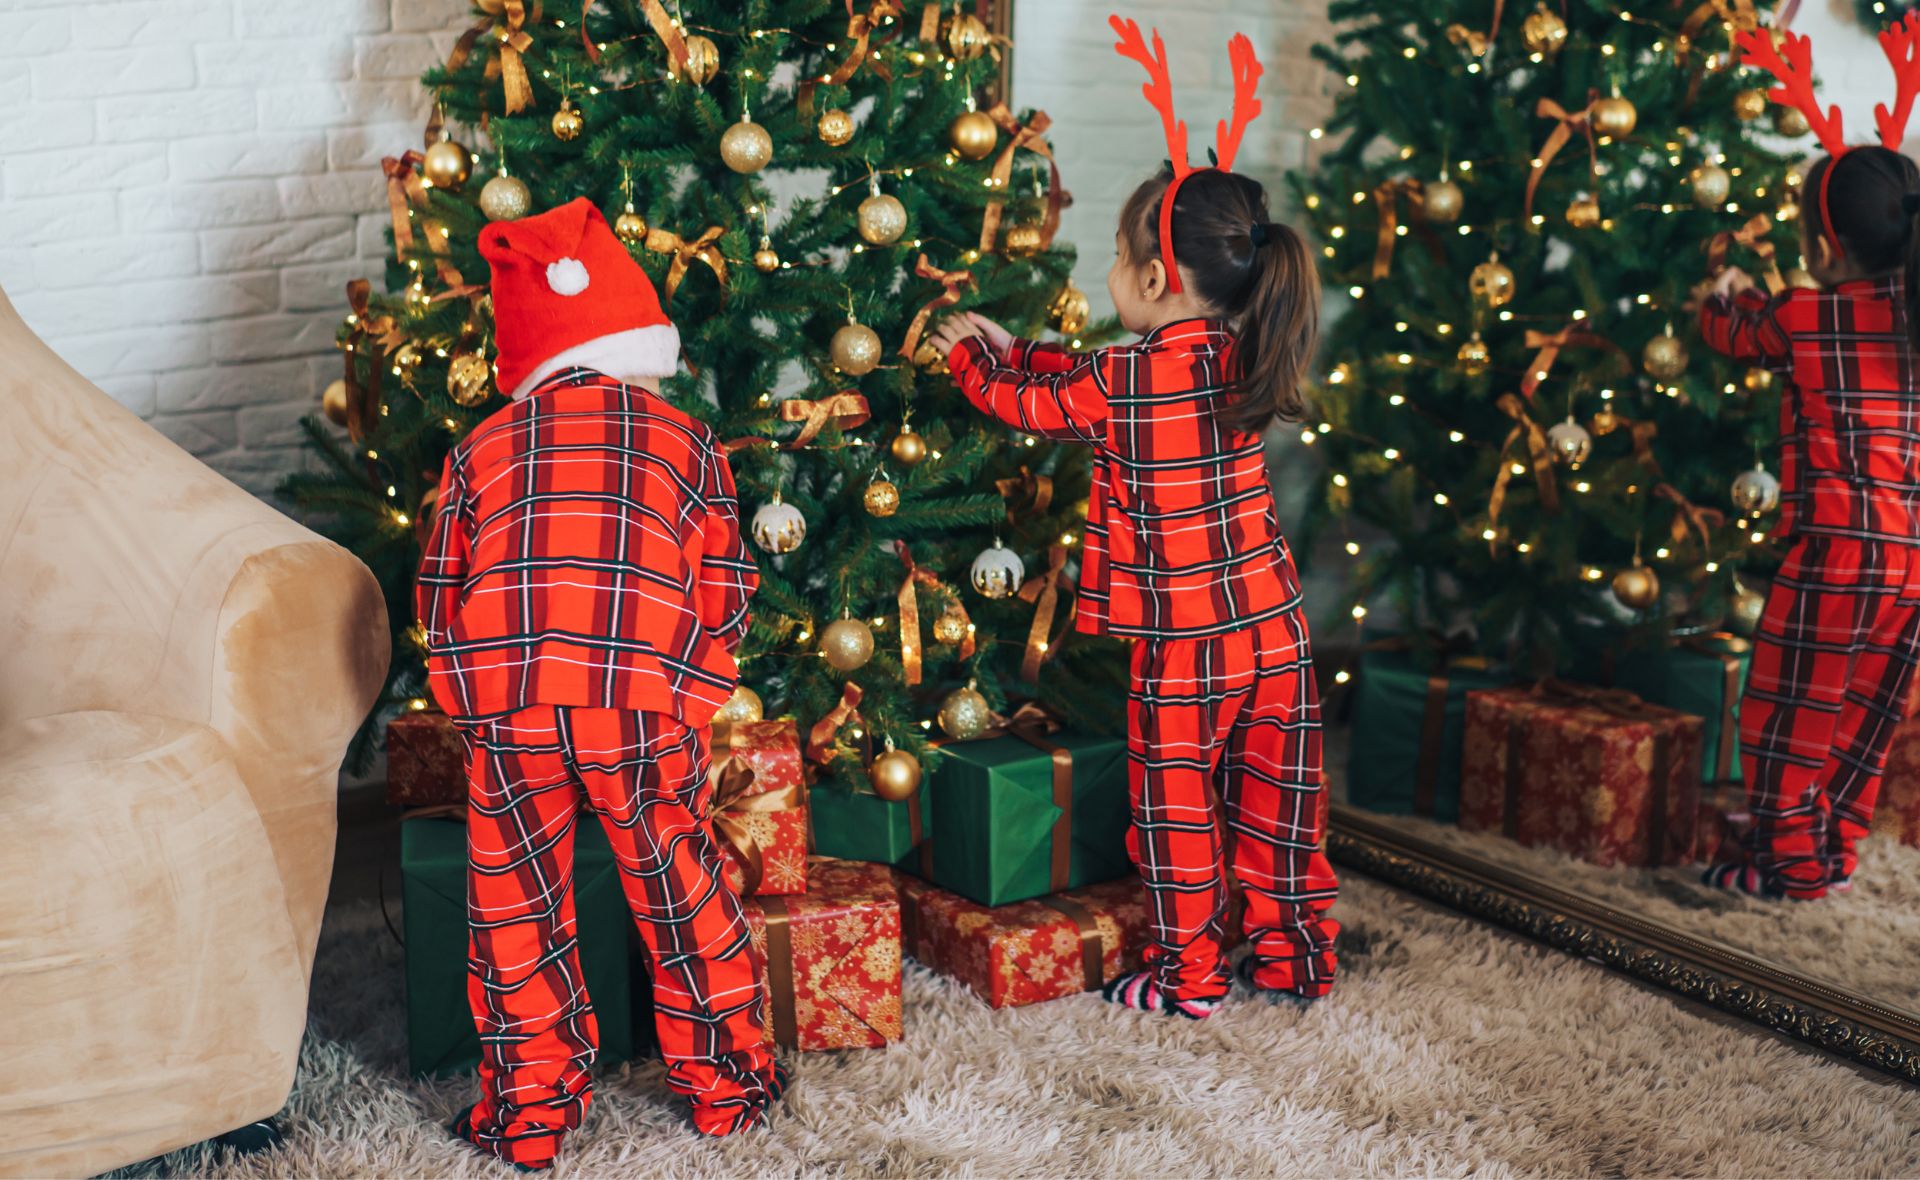 Bring the festive cheer with these matching Christmas PJs for the whole family